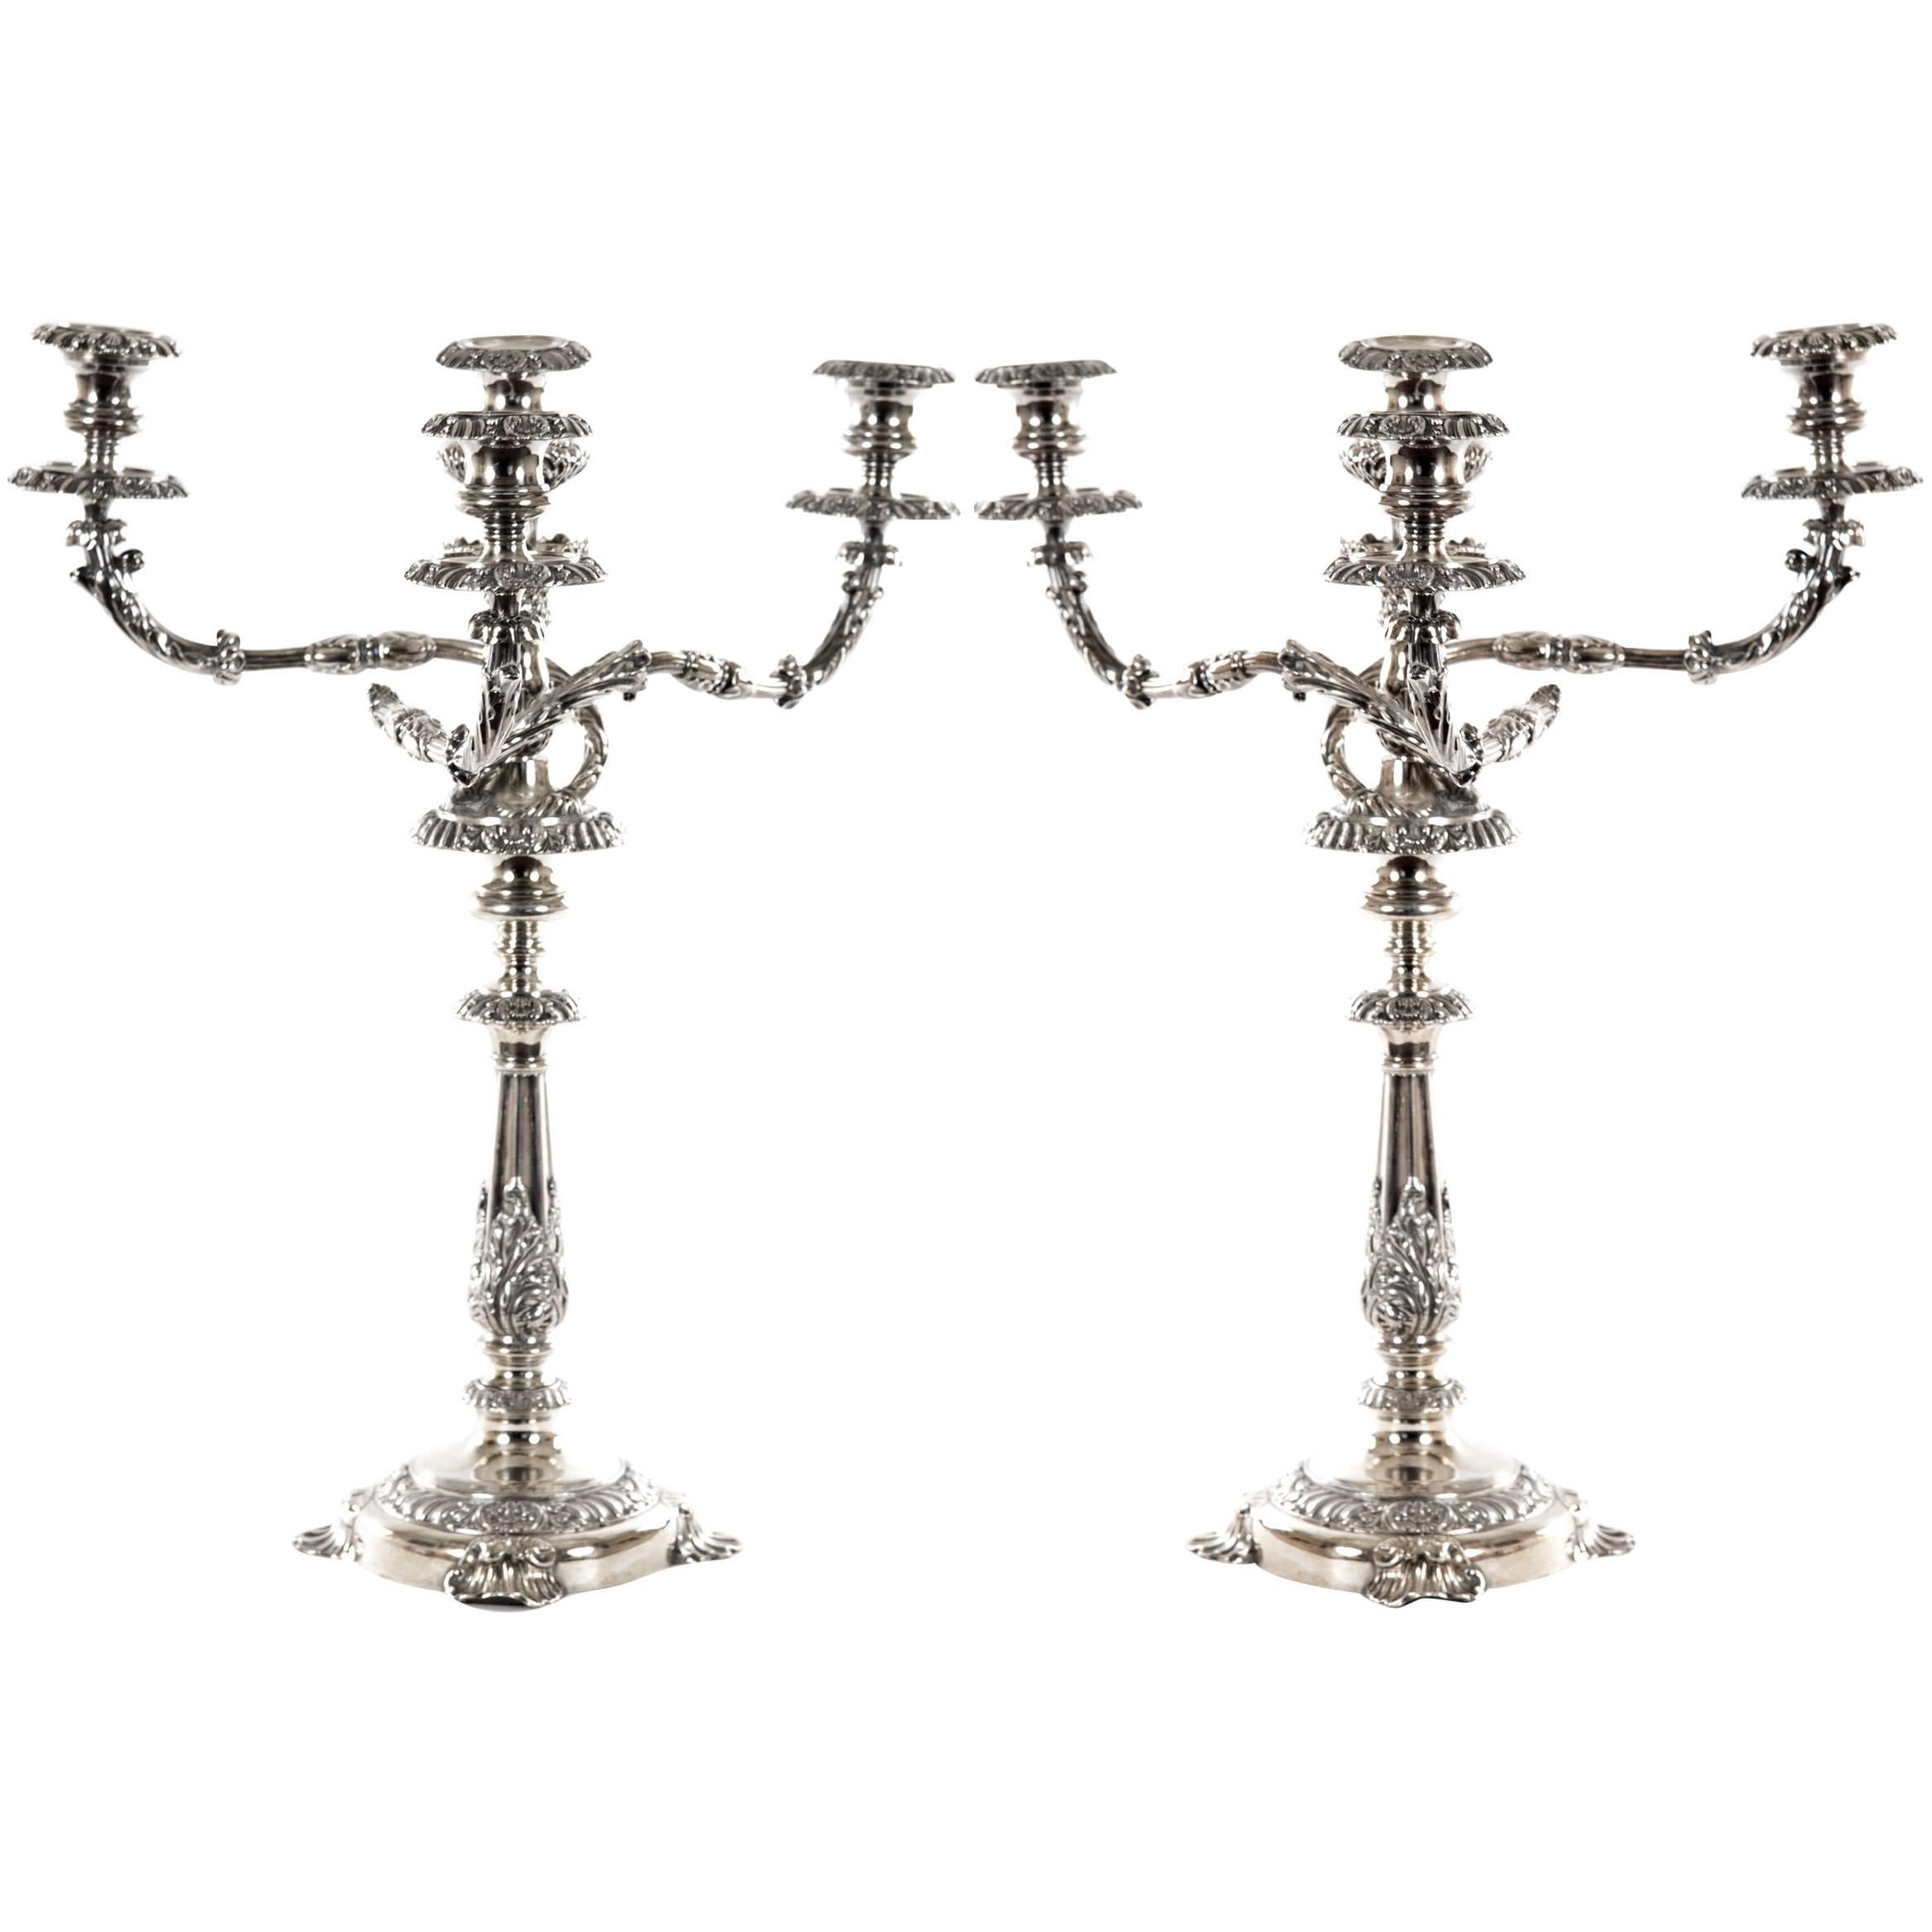 Pair of Silver Plated Four-Light Candelabra For Sale